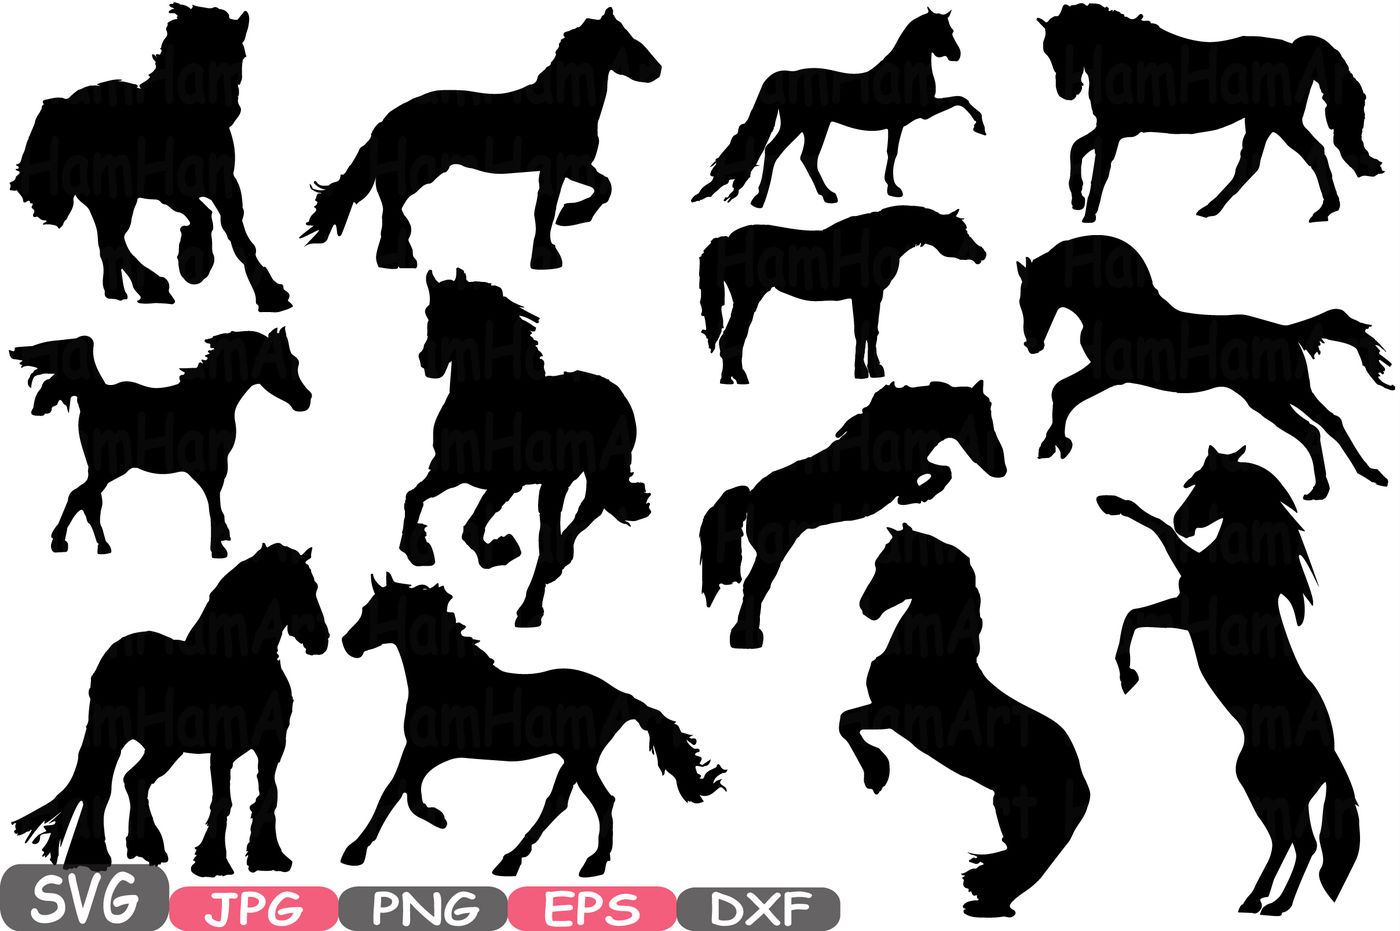 Download Wild Horses Mascot Woodland Monogram Horse Designs Silhouette Svg File Cutting Files Stickers School Clipart Dxf Cricut Zoo 663s By Hamhamart Thehungryjpeg Com